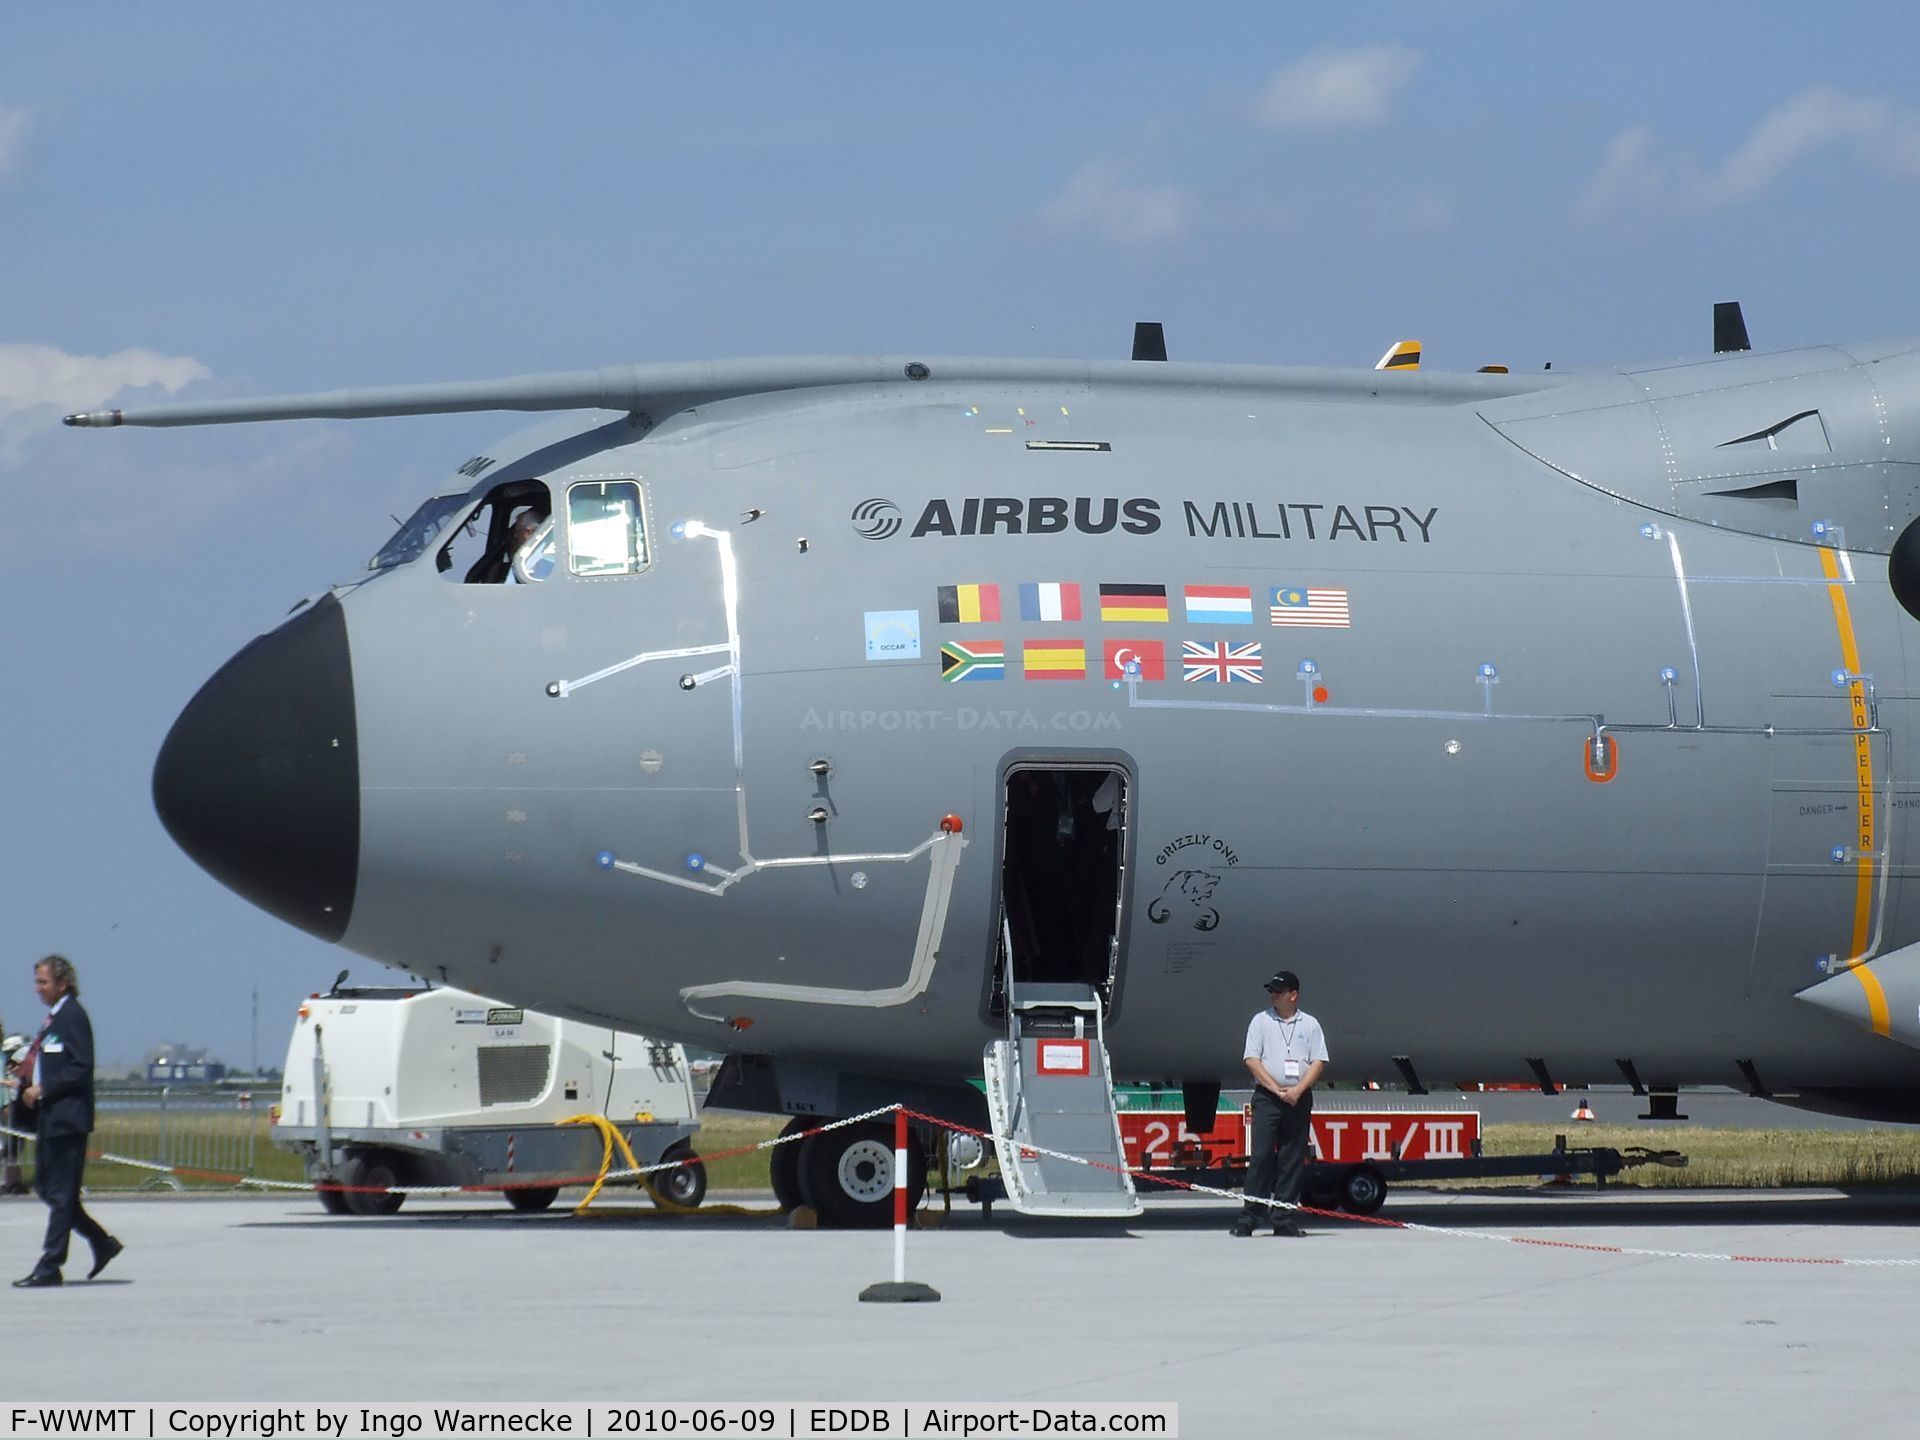 F-WWMT, 2009 Airbus A400M Atlas C/N 001, Airbus A400M (first prototype) at ILA 2010, Berlin